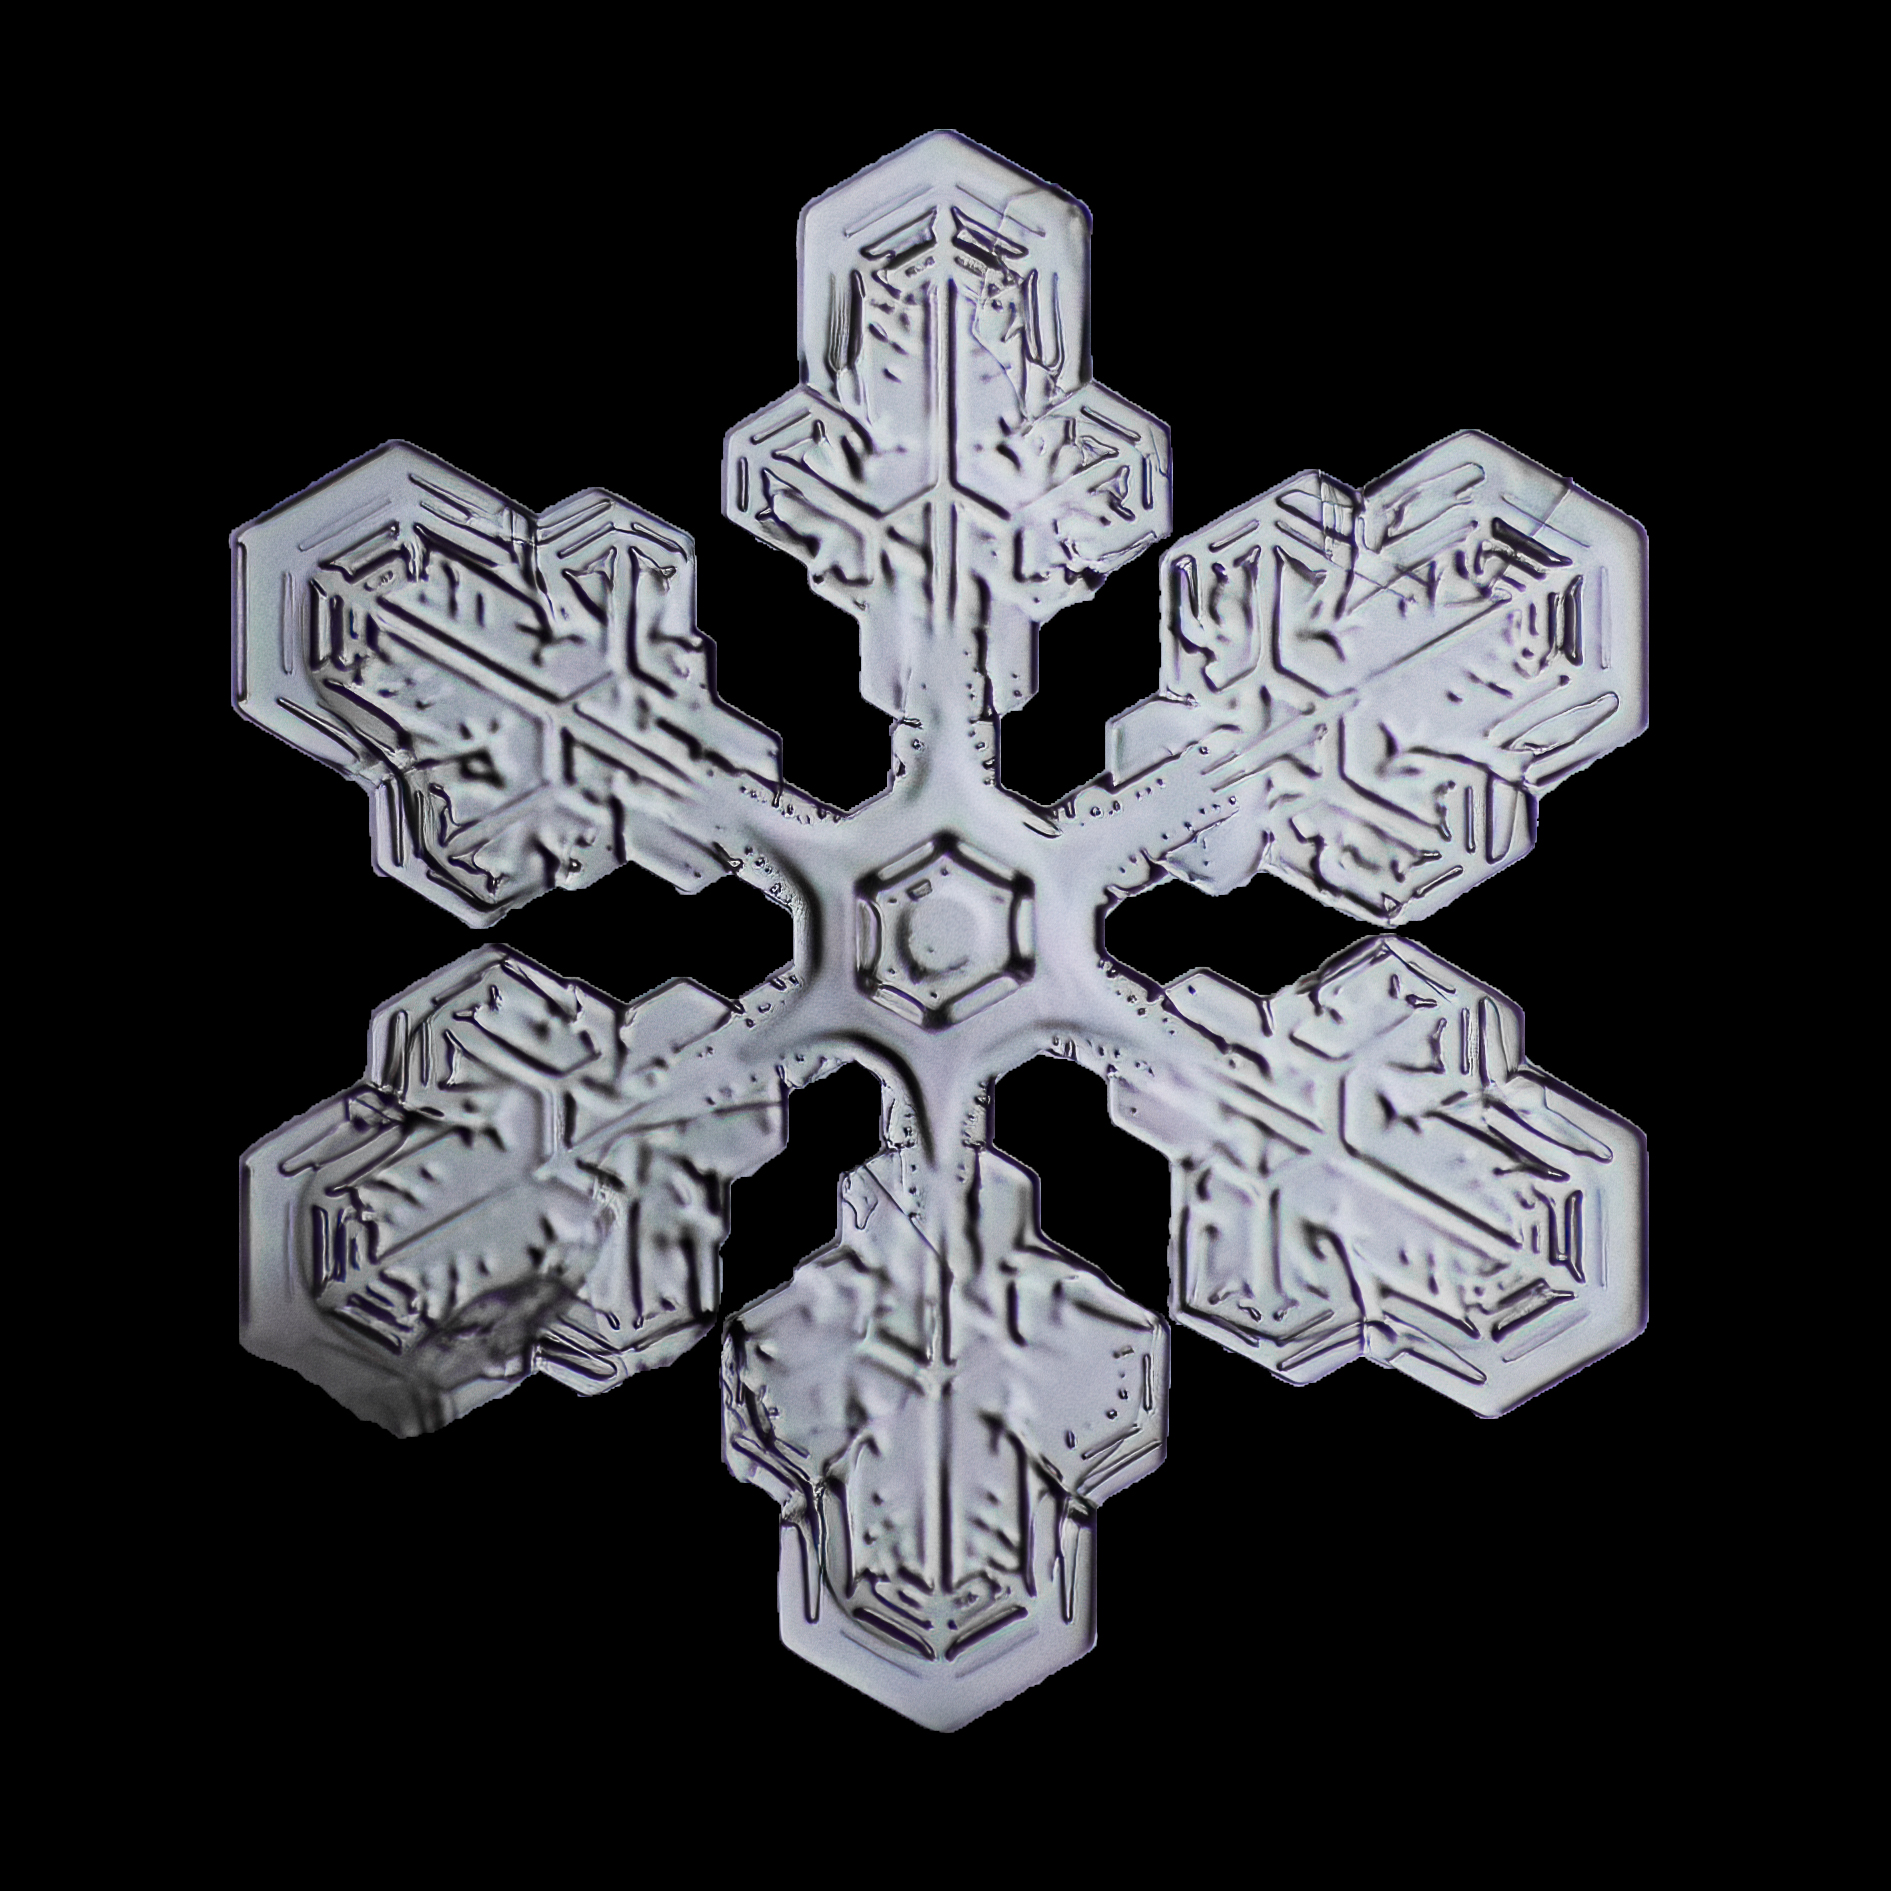 Stellar Dendrite Snowflake, one of the many kinds that fall to the ground when it snows